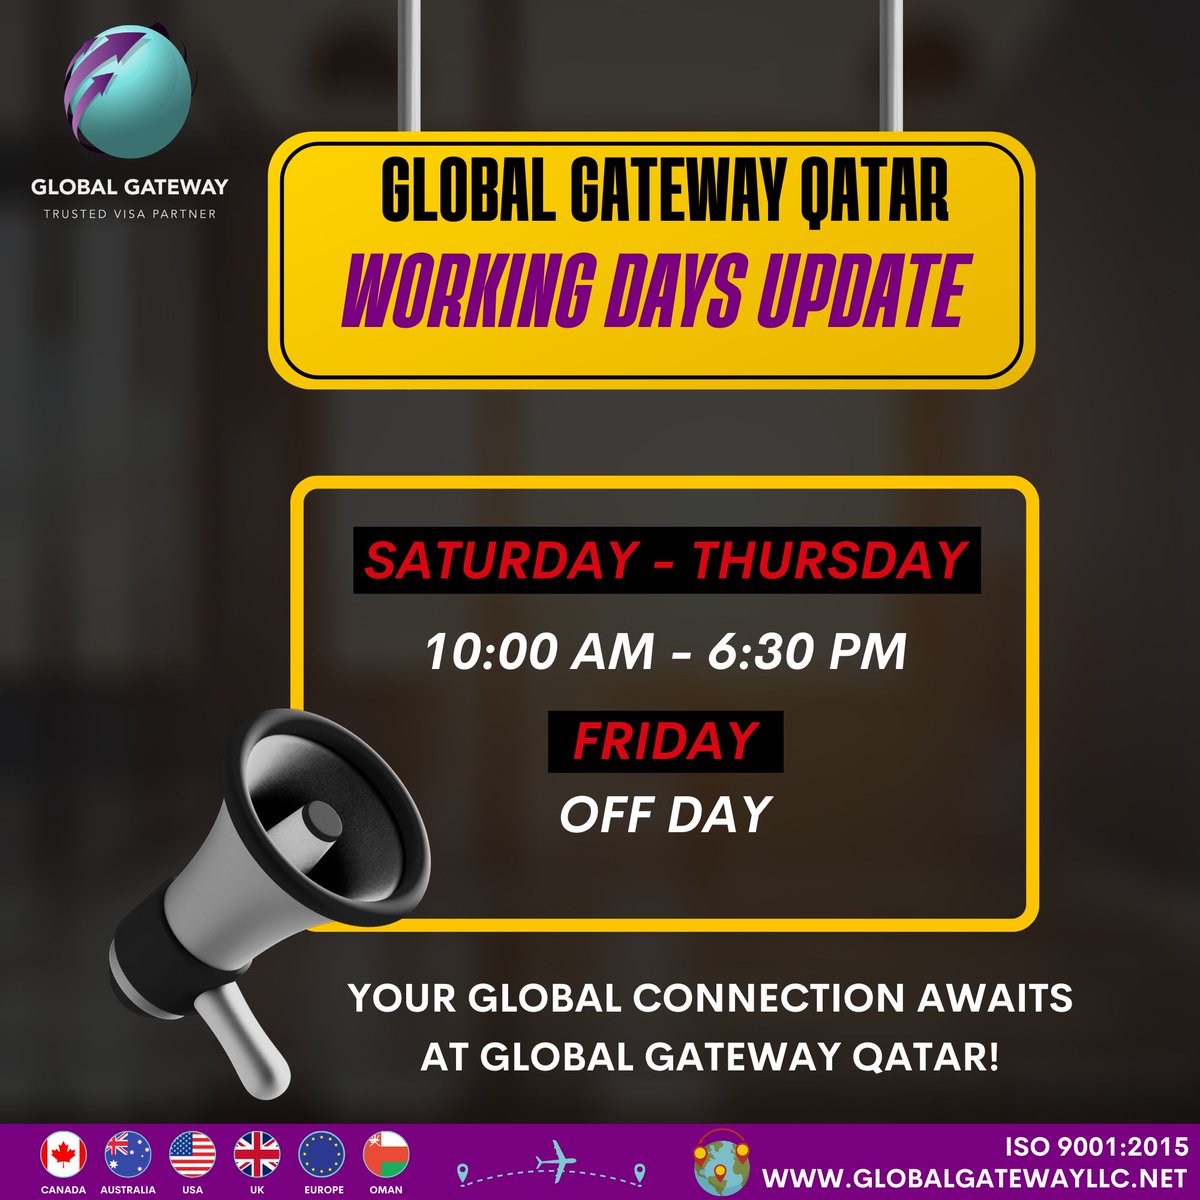 Global Gateway Qatar awaits your exploration! 
Open Saturday-Thursday, 10 AM - 6:30 PM. 
Friday: Off day.

#GlobalGateway #Weekend #updatedtime